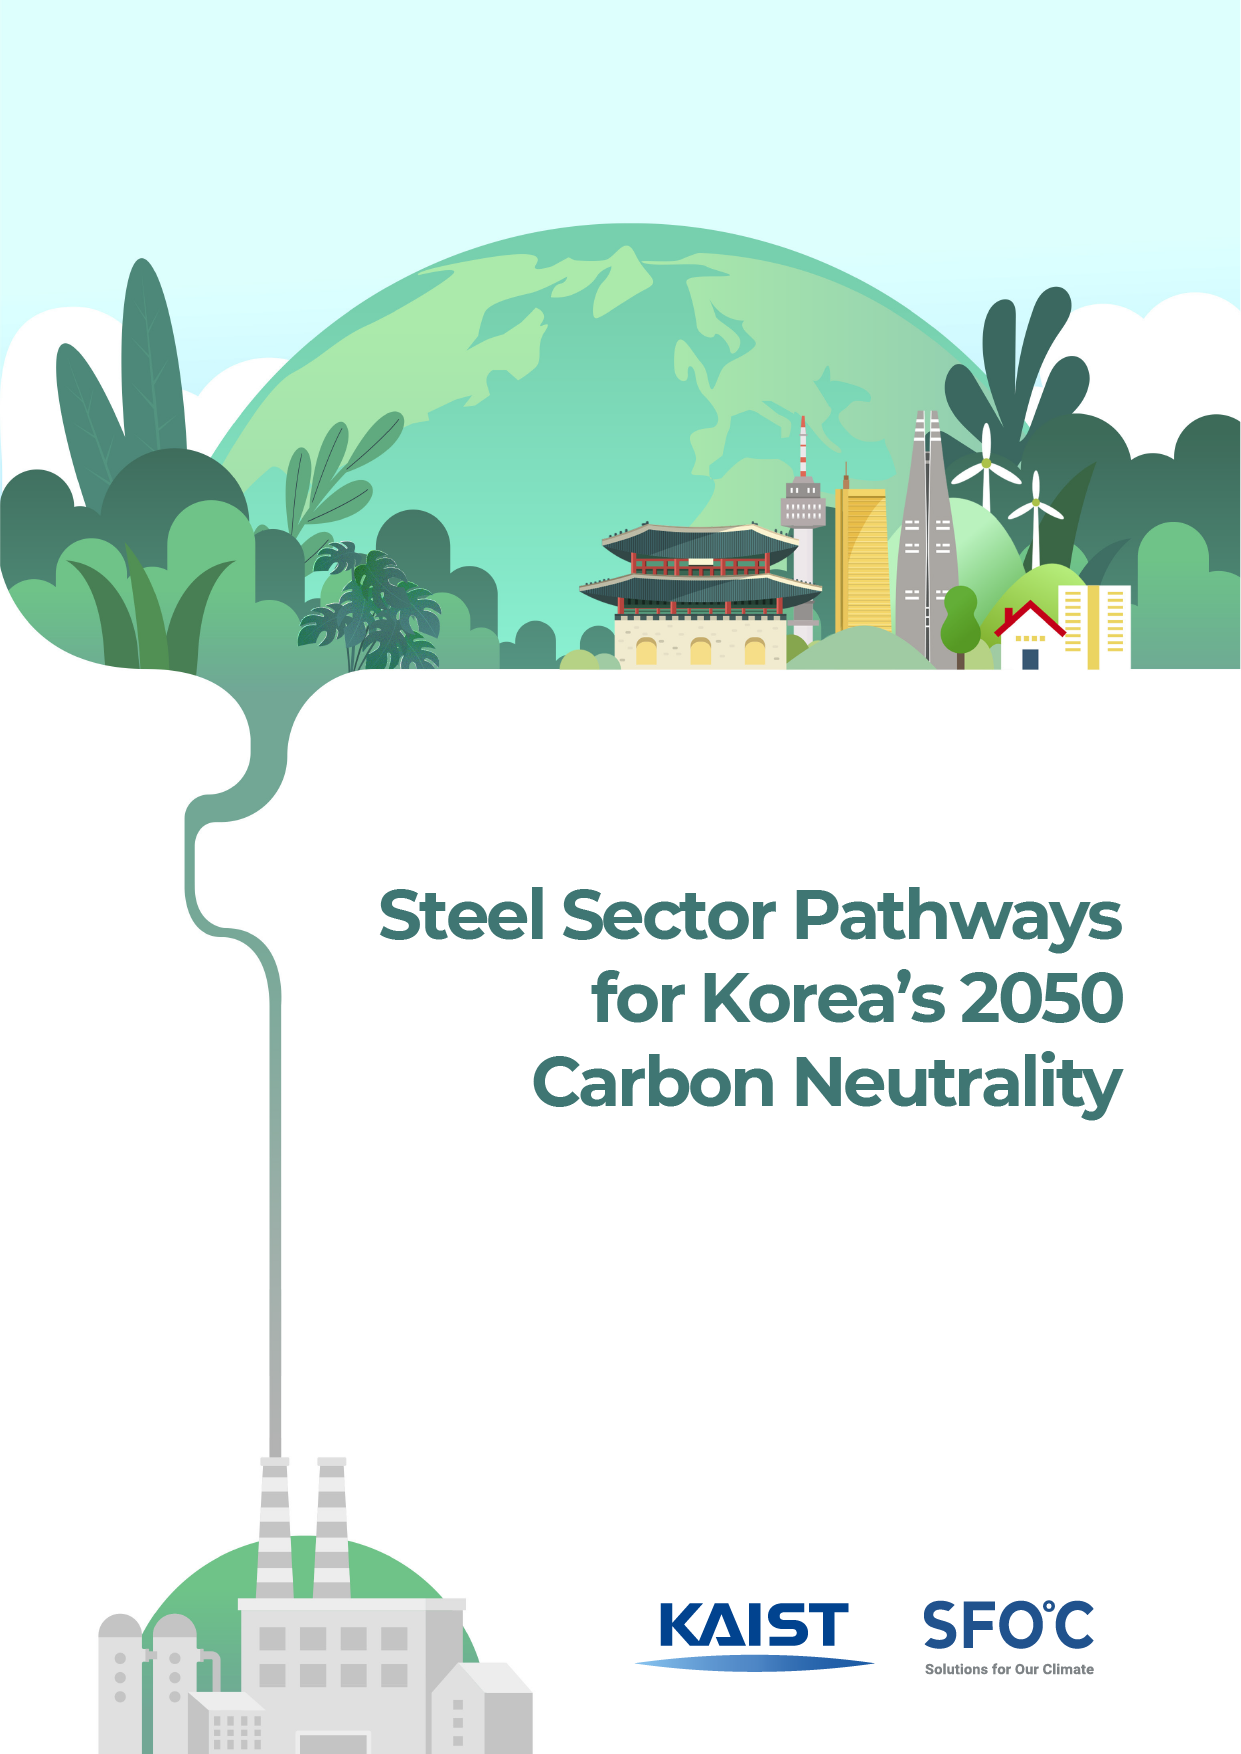 Steel Sector Pathways for Korea's 2050 Carbon Neutrality